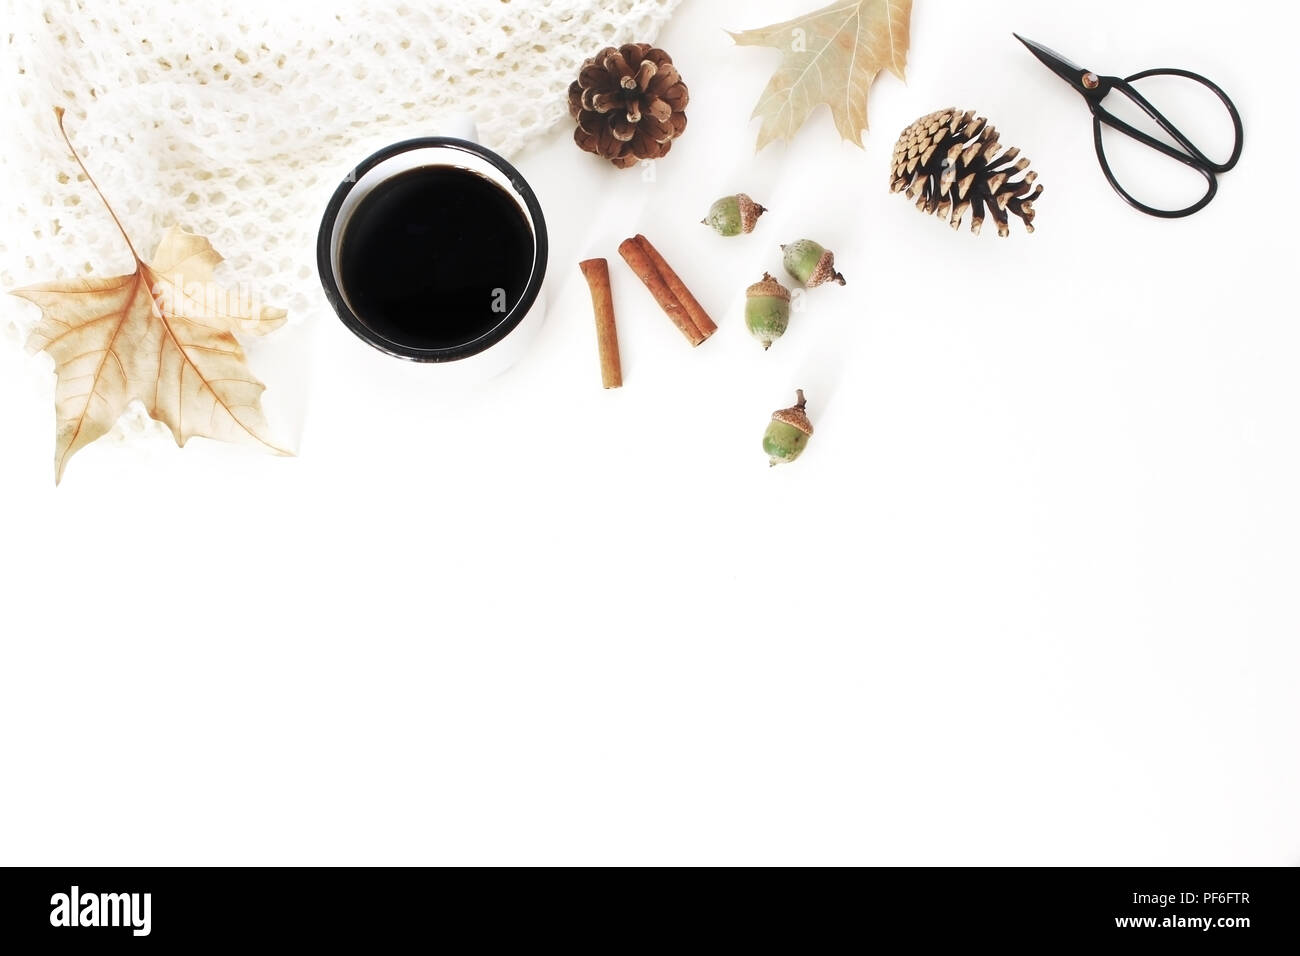 Autumn, fall composition. Cup of coffee, knitted blanket. Autumn leaves and cinnamon sticks. Pine cones, acorns and vintage scissors. White table back Stock Photo